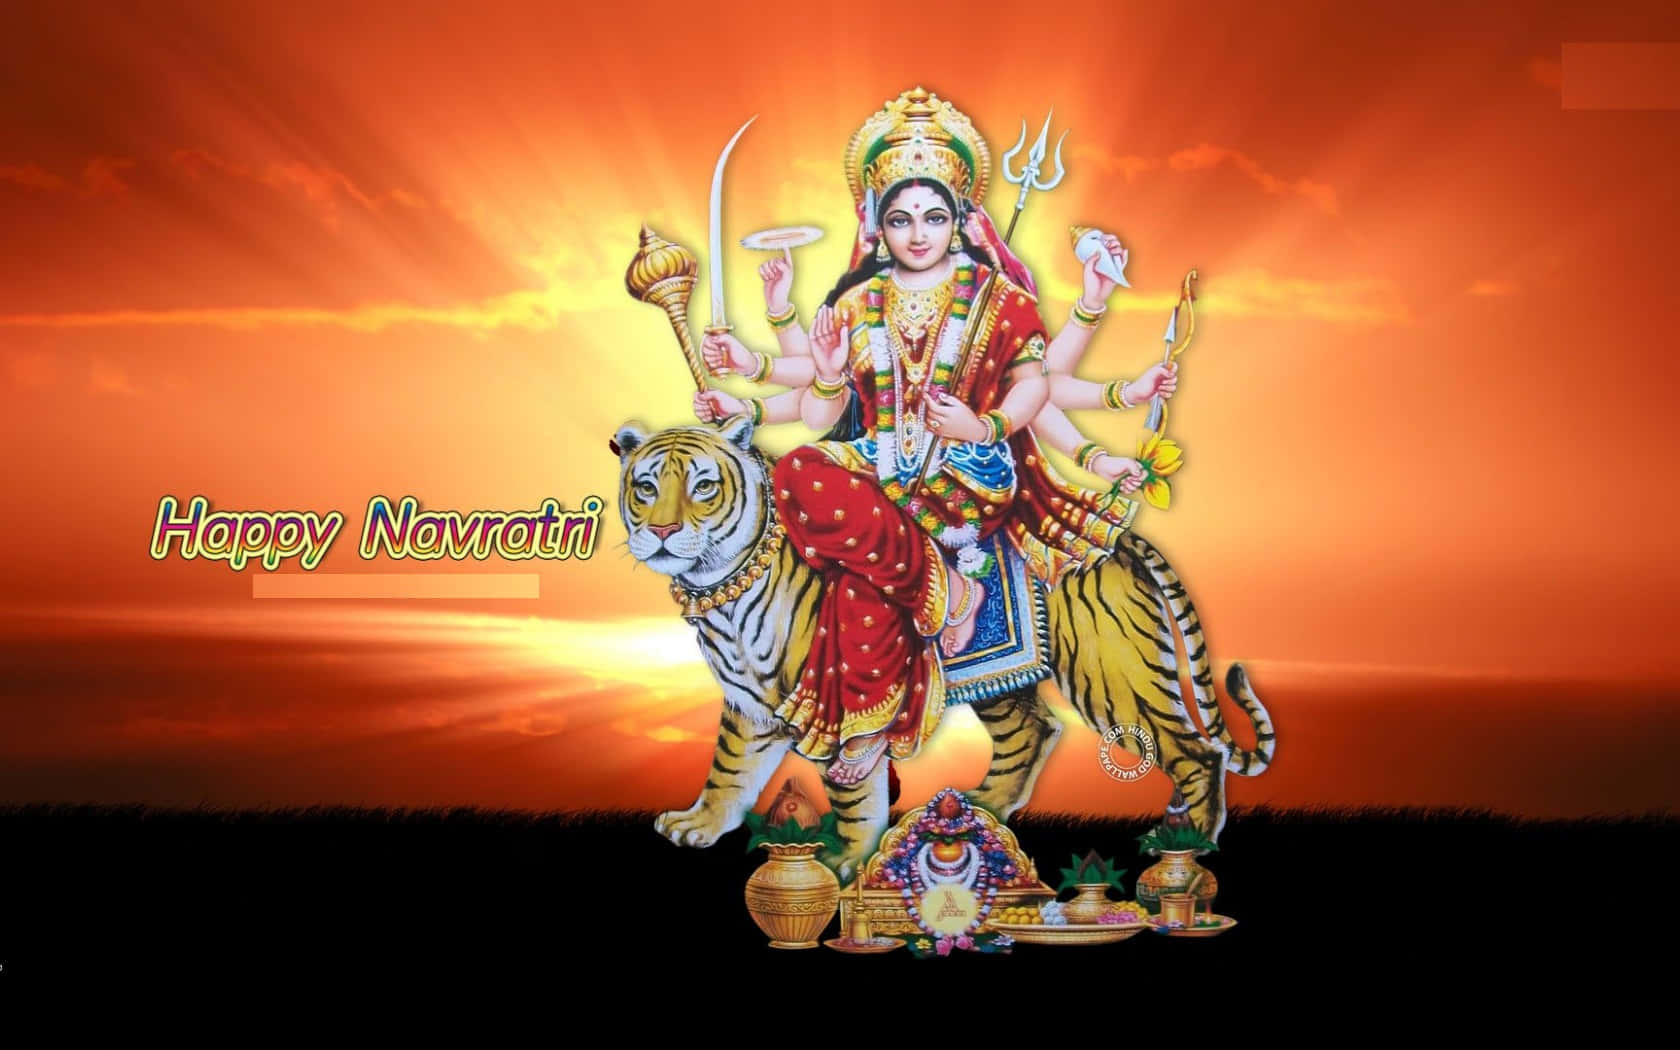 Welcome the festive vibes of Navratri!